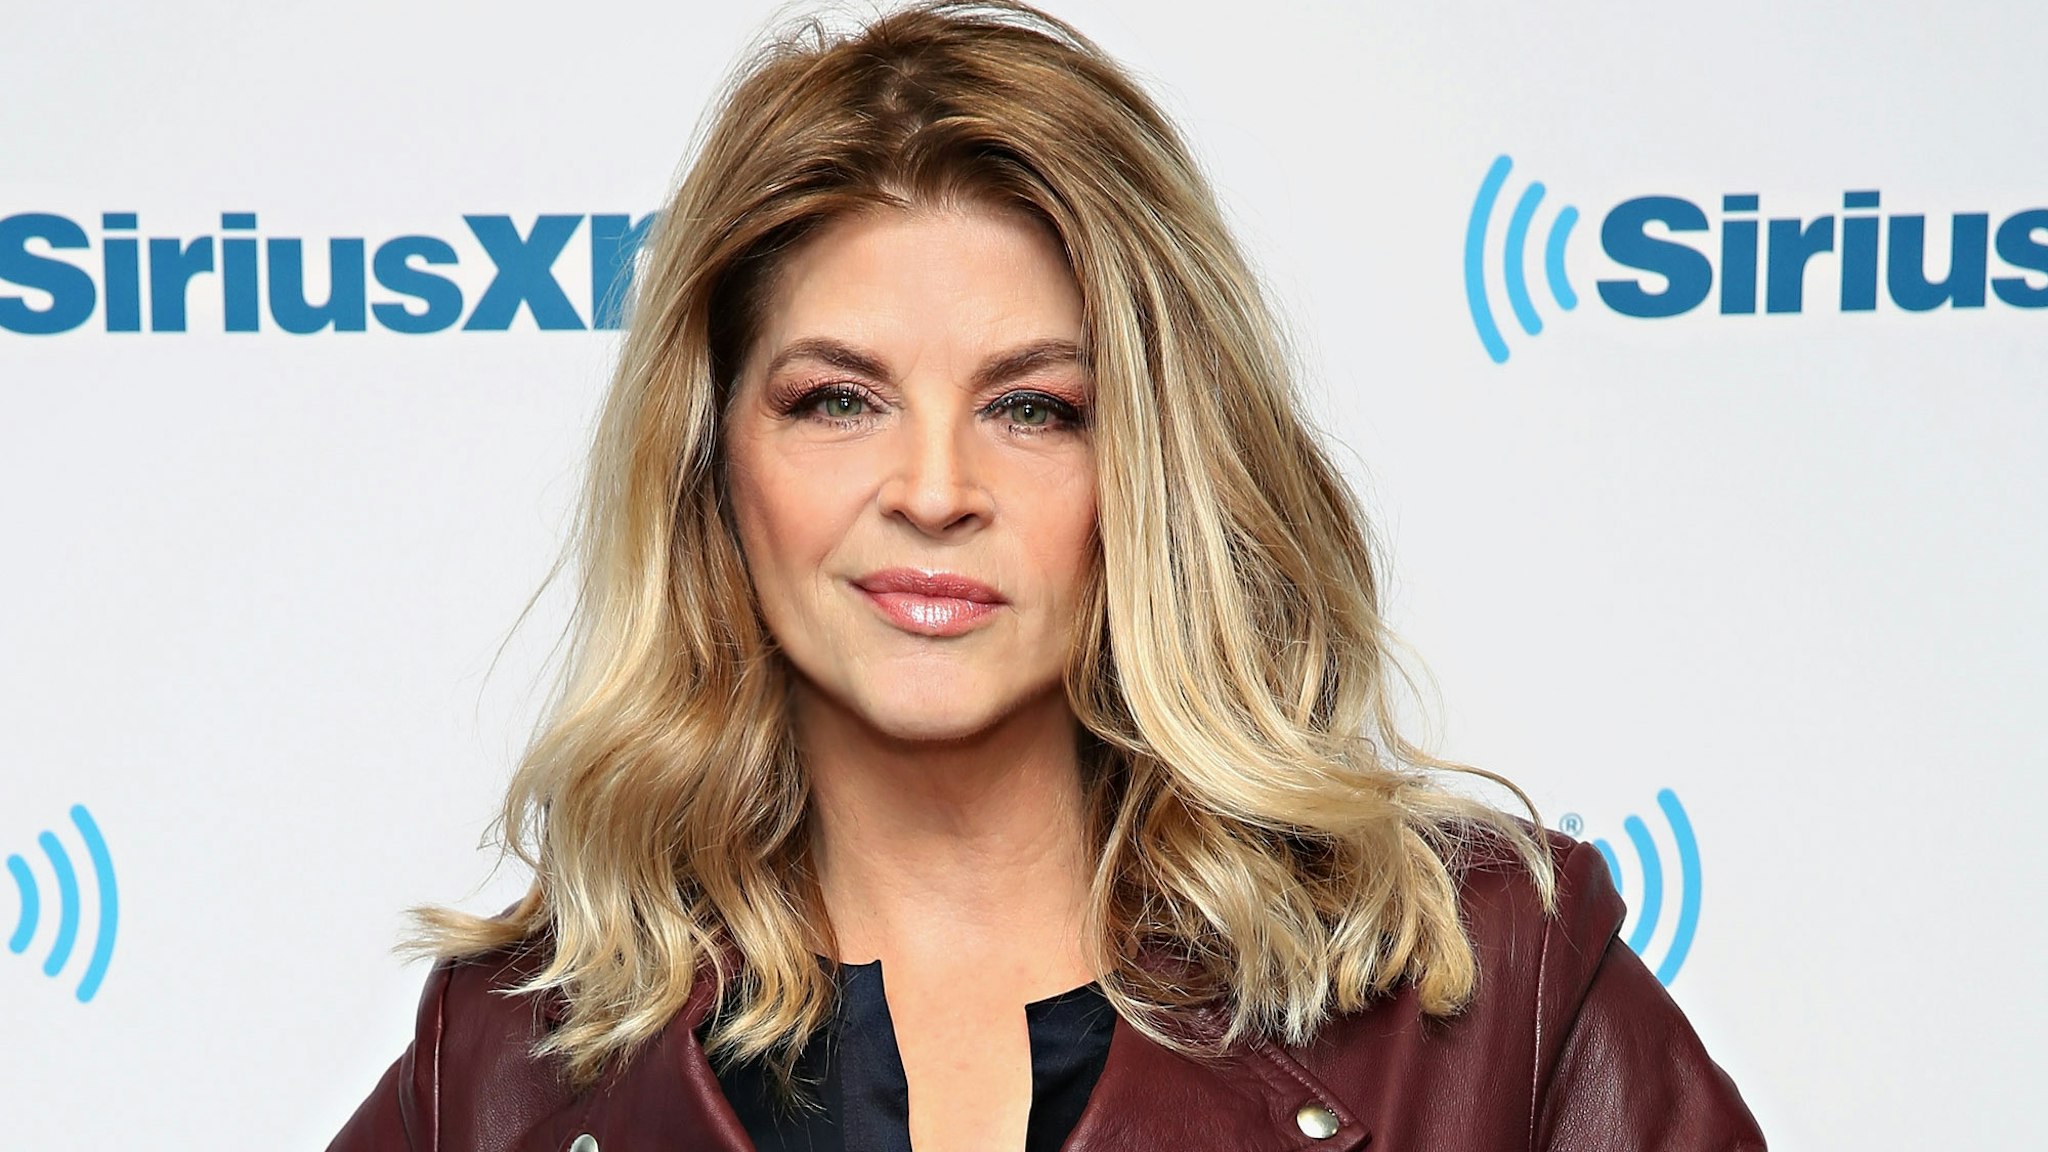 NEW YORK, NY - JANUARY 06: Actress Kirstie Alley visits the SiriusXM Studios on January 6, 2016 in New York City.